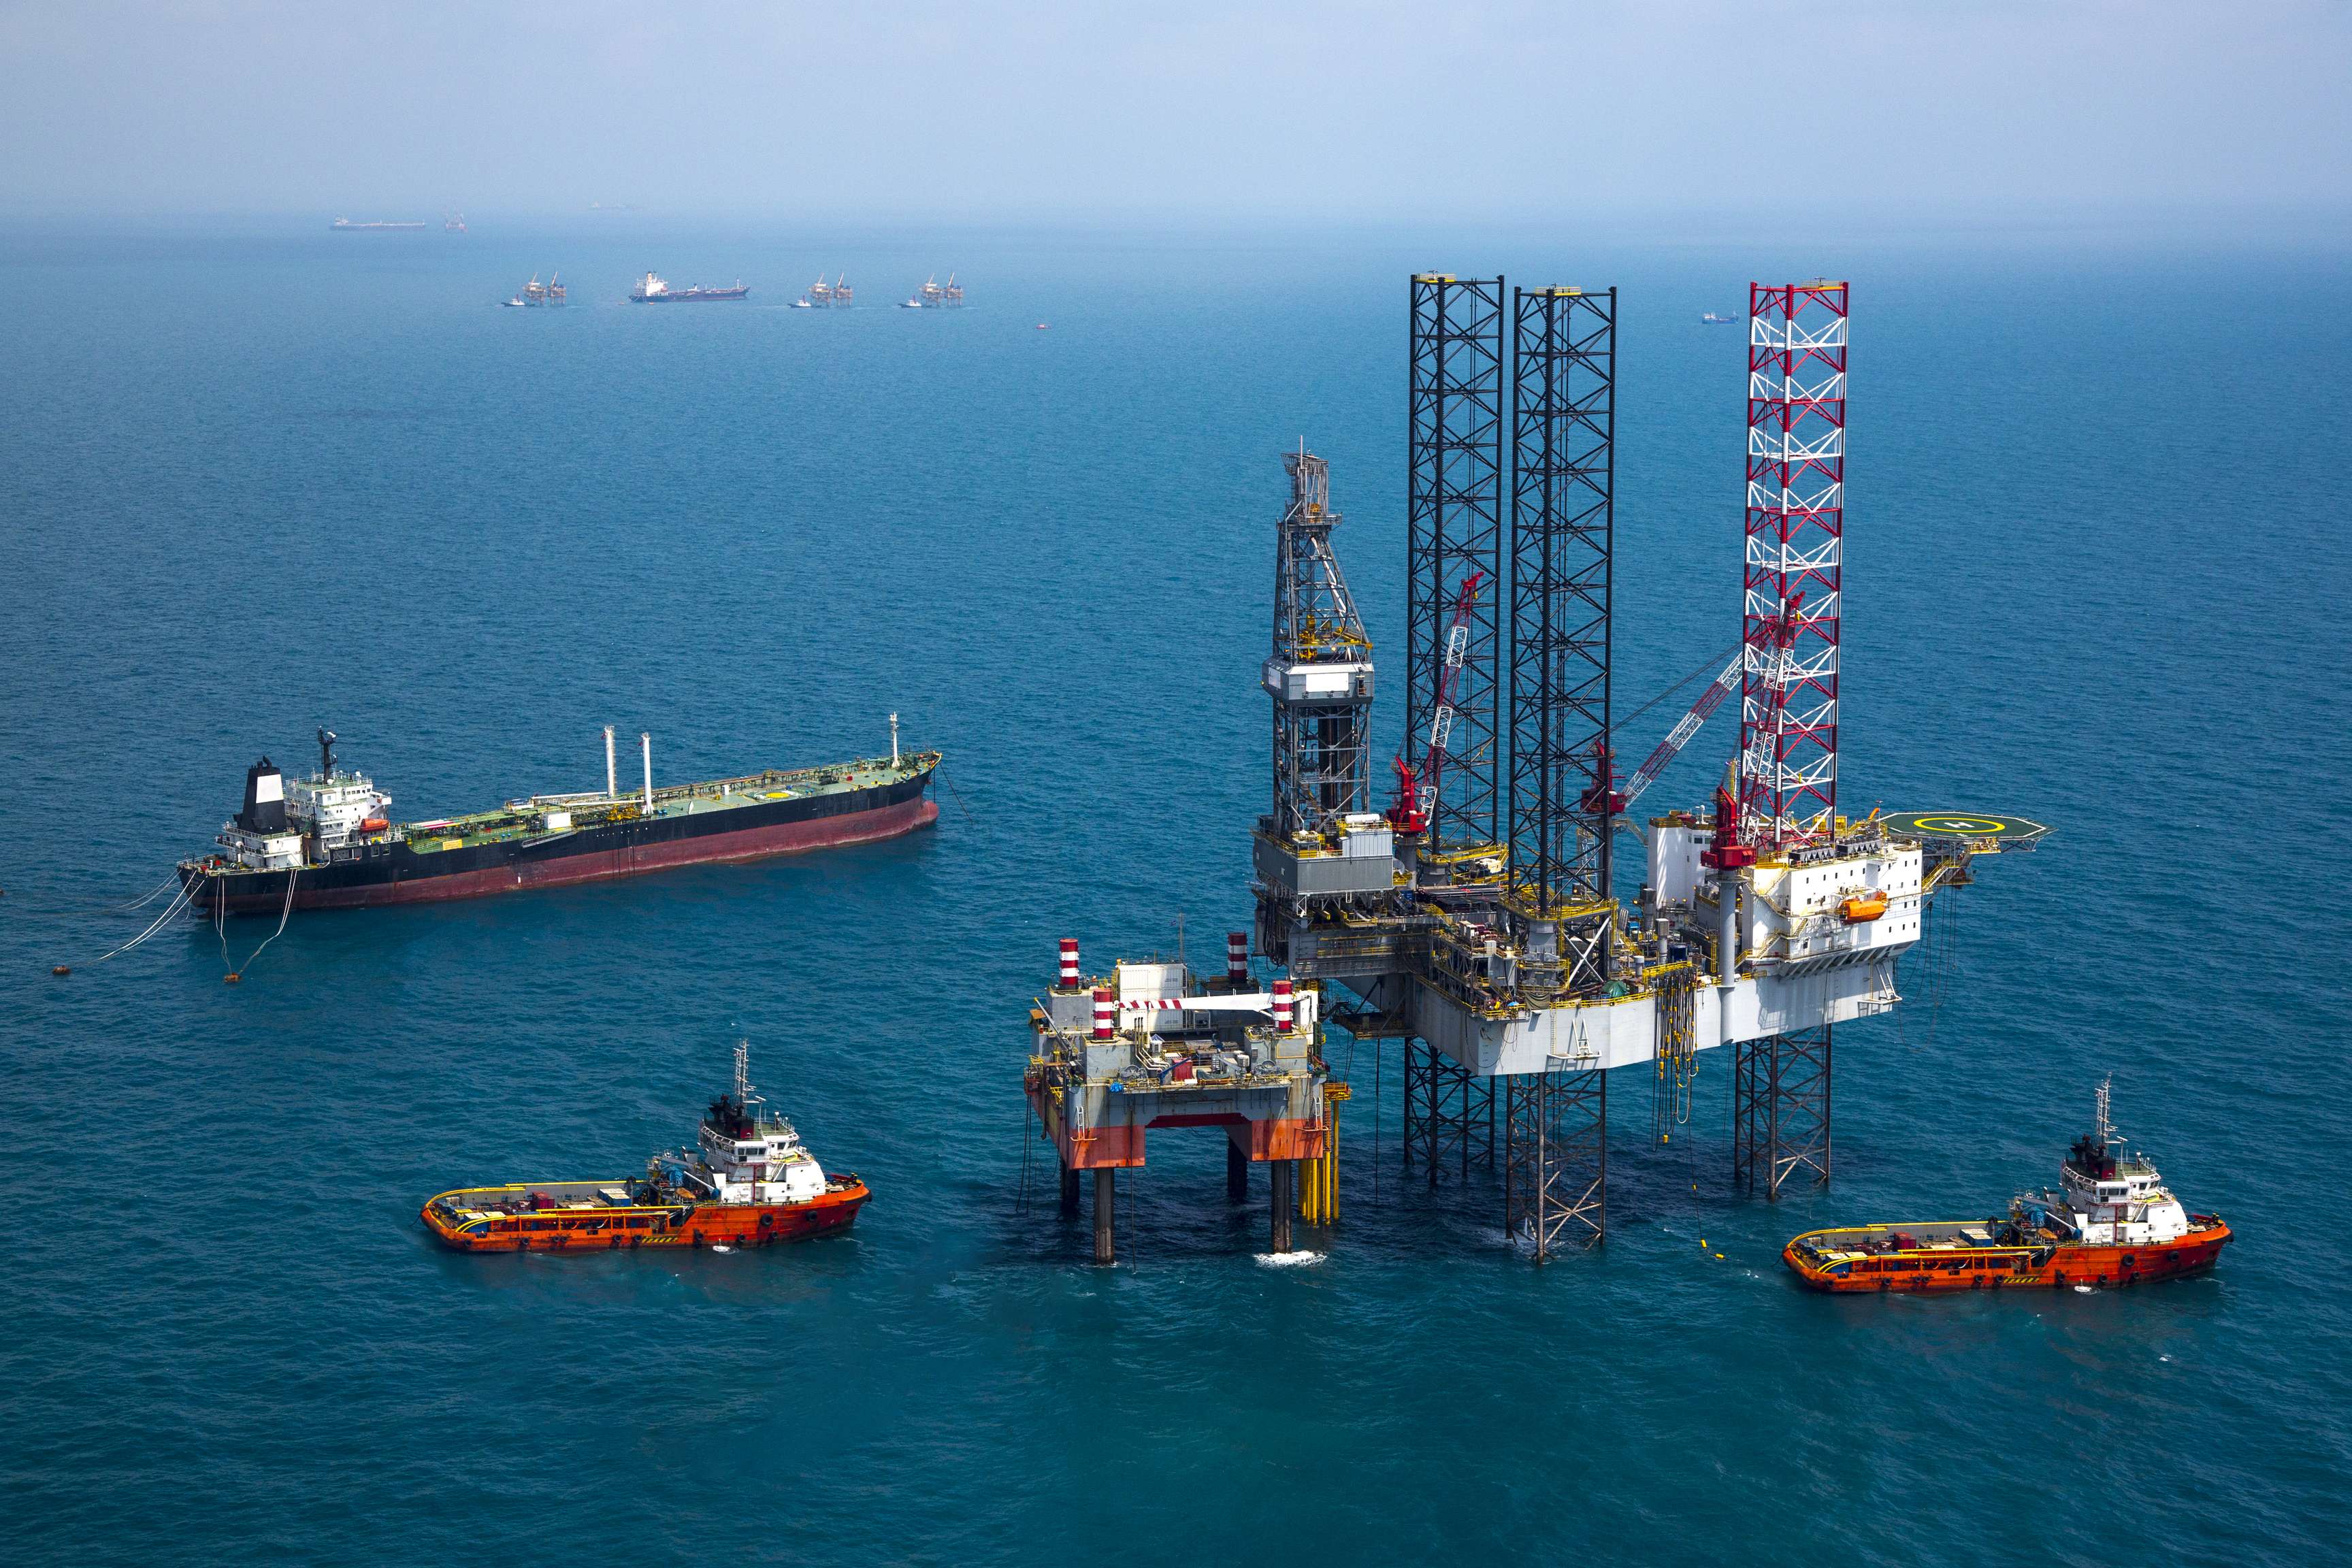 Offshore platform with tanker and other vessels surrounding it.